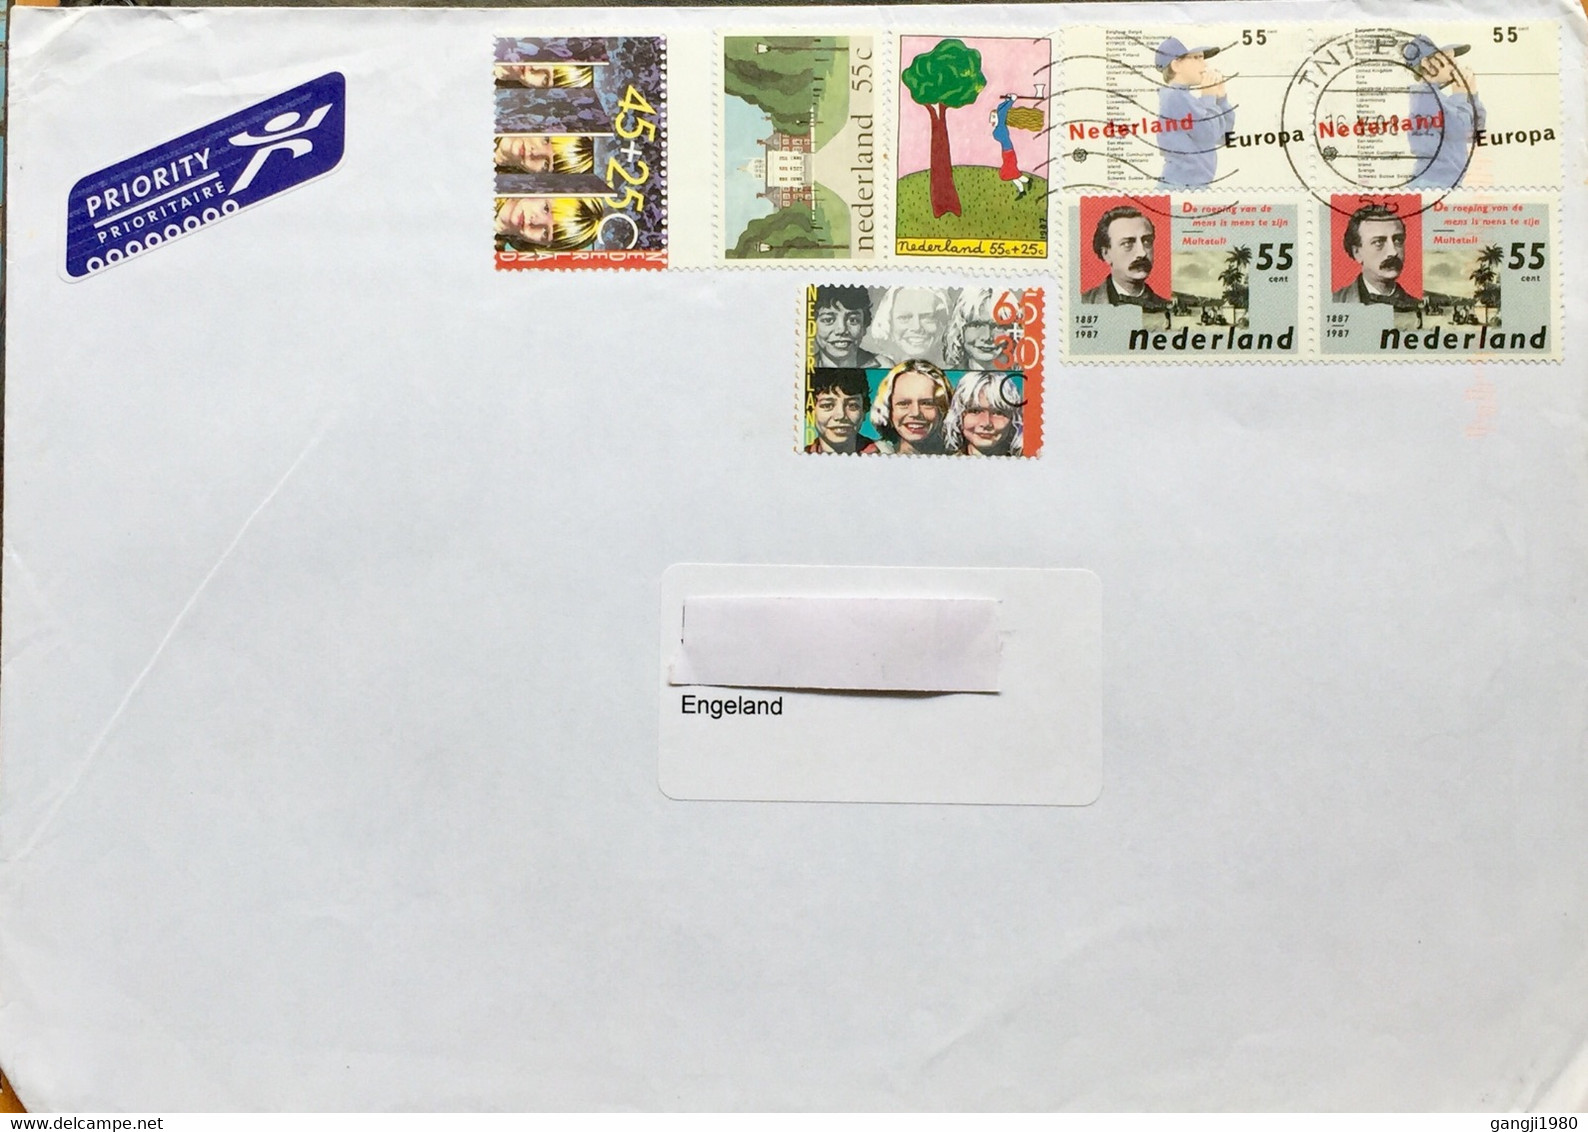 NEDERLAND 2008, AIRMAIL USED COVER TNT POST TO ENGLAND 8 STAMPS USED!!! ARCHITECTURE ,SAVE TREE ,EUROPA,CHILDREN BOYS , - Brieven En Documenten